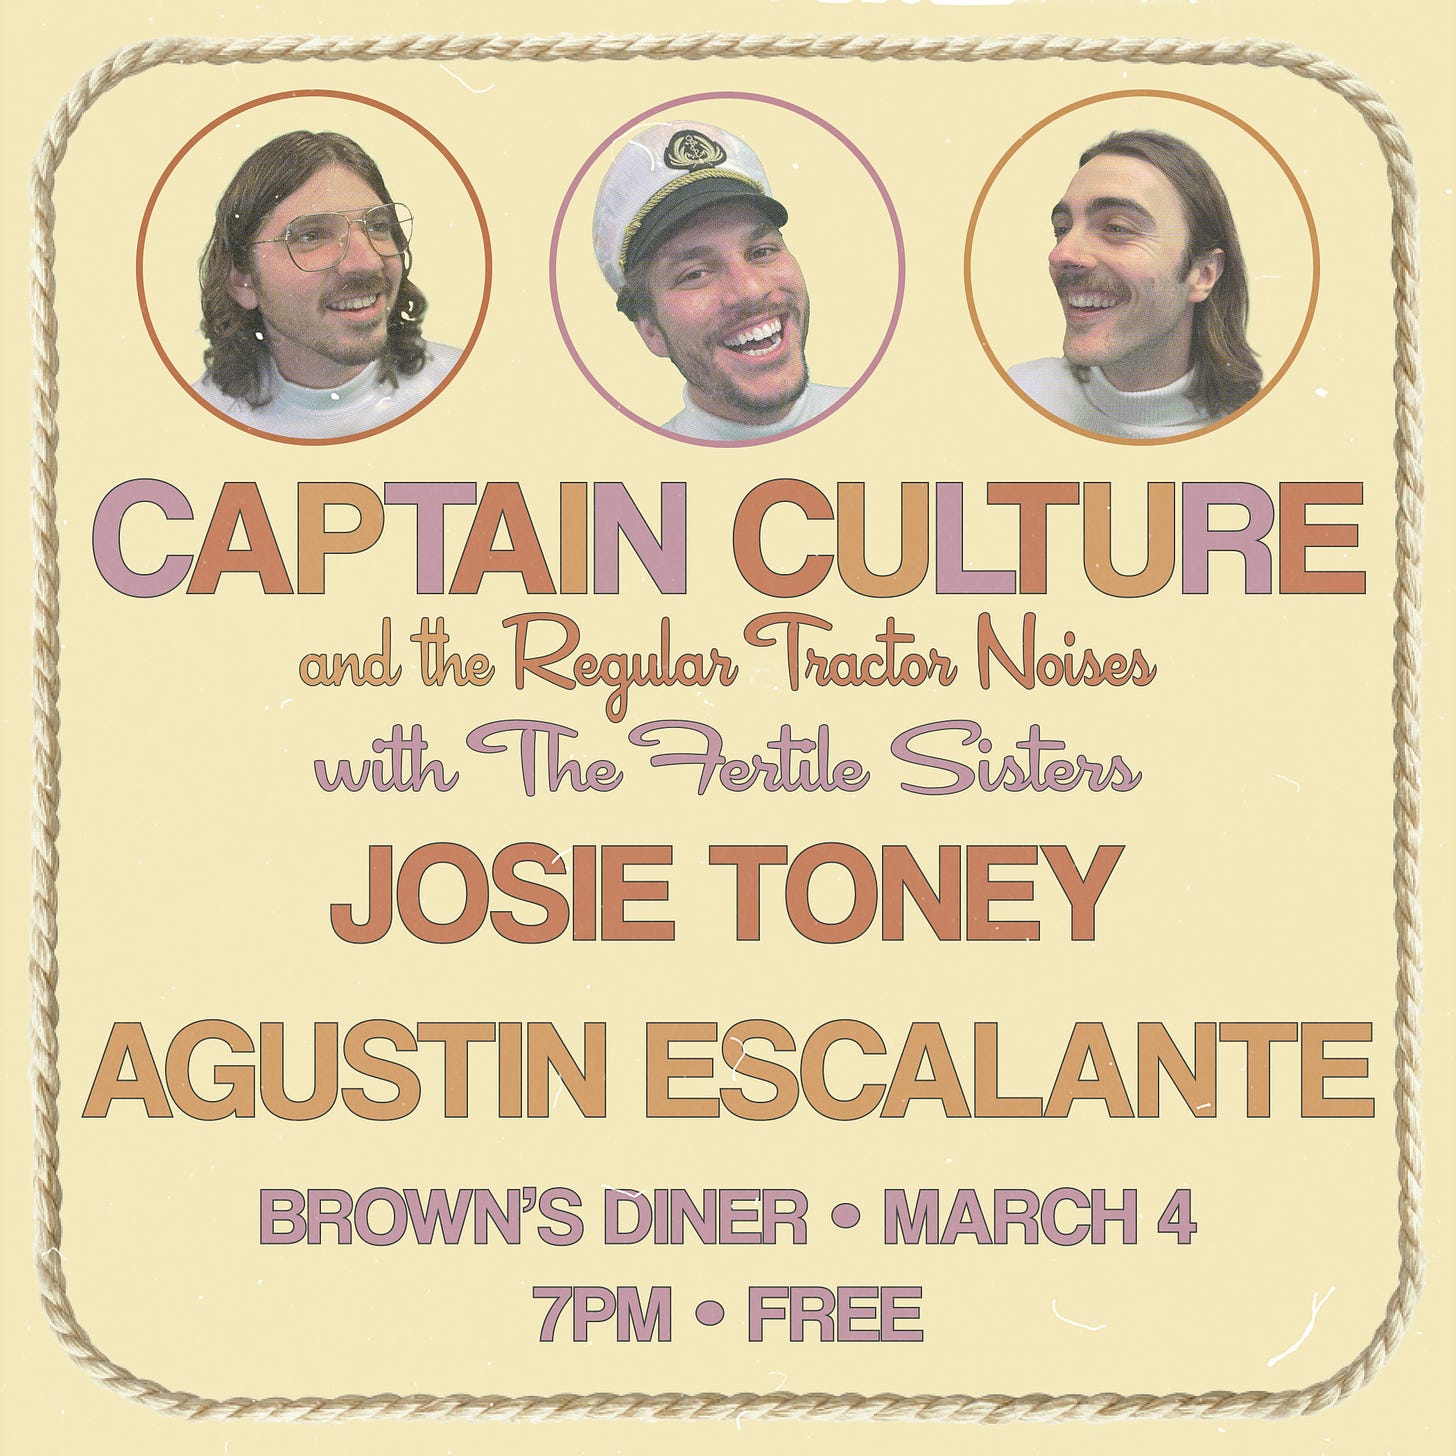 3 familiar looking guys from Captain Culture and the Regular Tractor Noises. Also featuring The Fertile Sisters, Josie Toney, and Agustin Escalante at Brown's Diner 3/4/23.